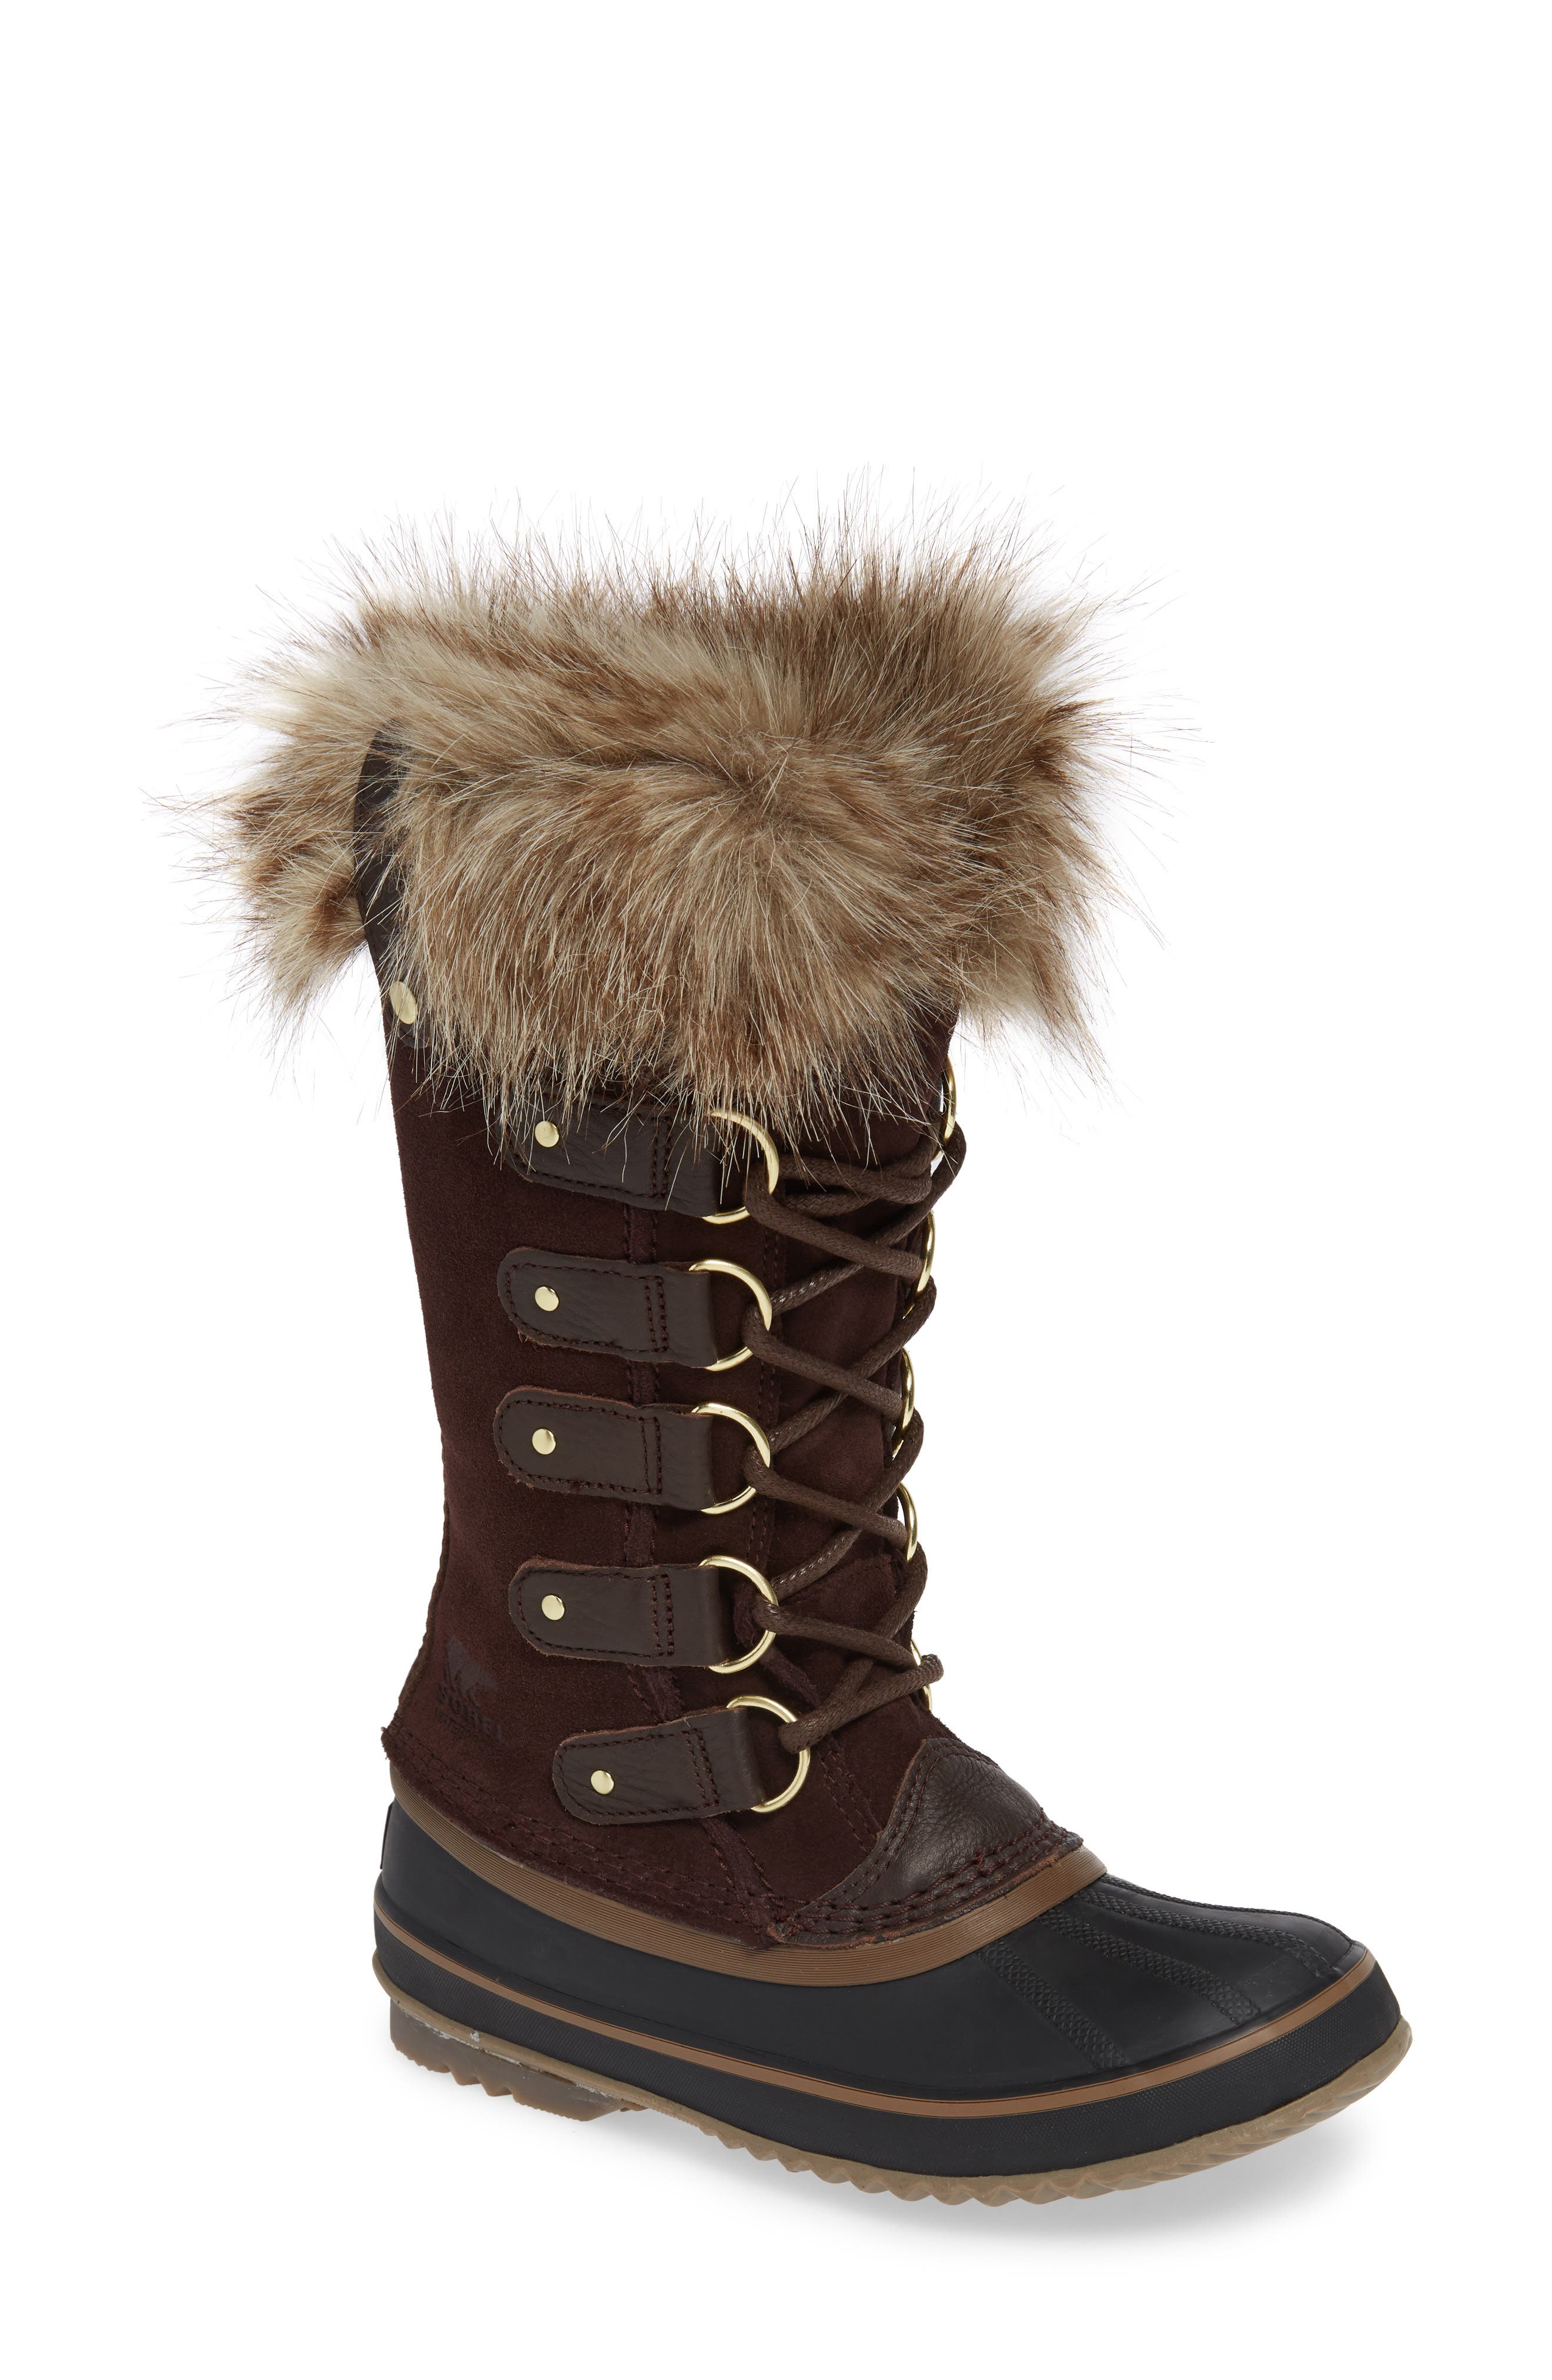 snow boots nordstrom